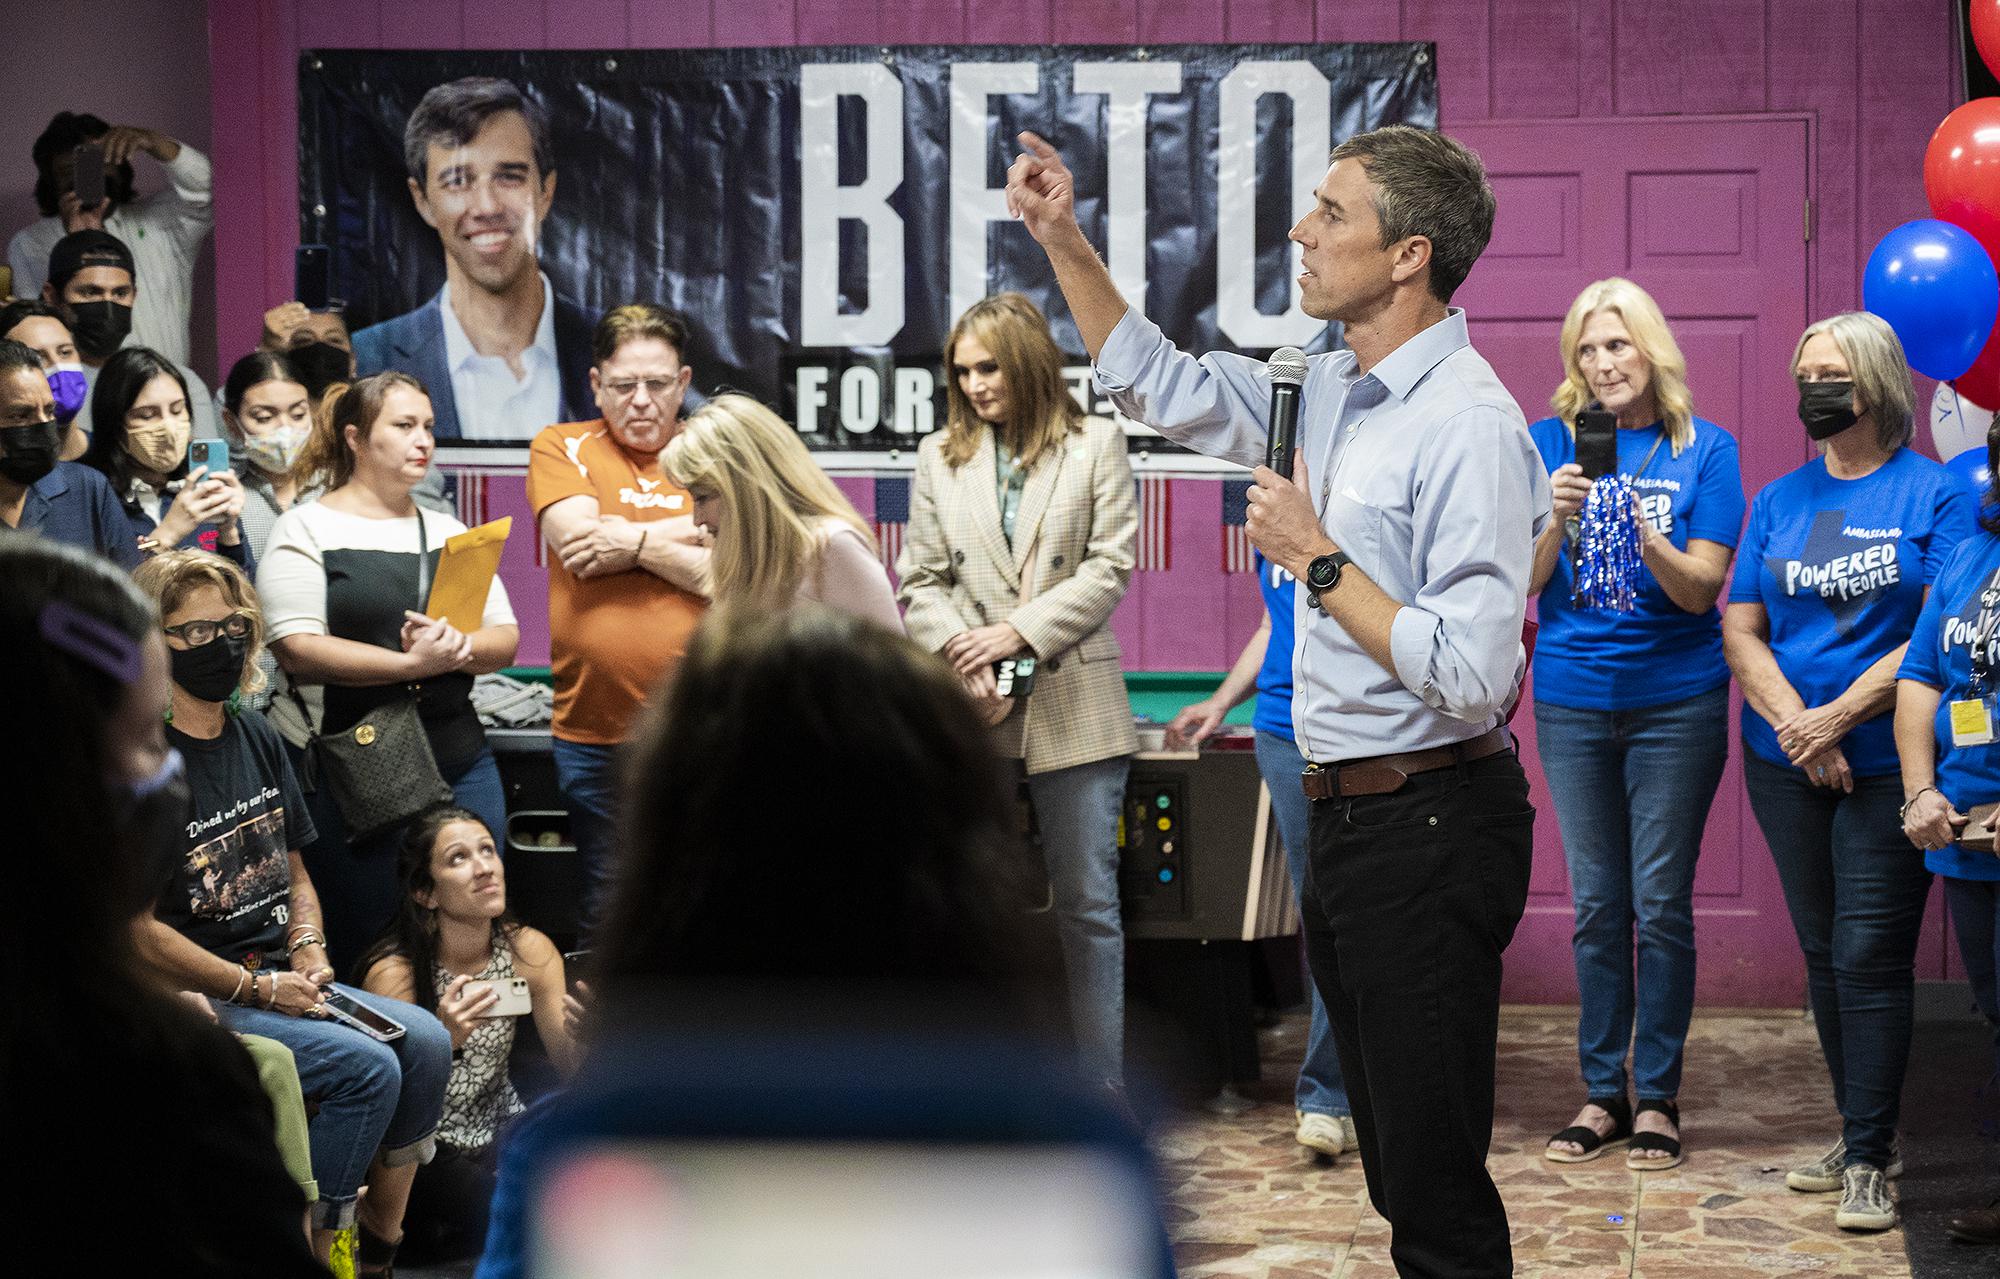 Beto O'Rourke walks tightrope on immigration, border policy